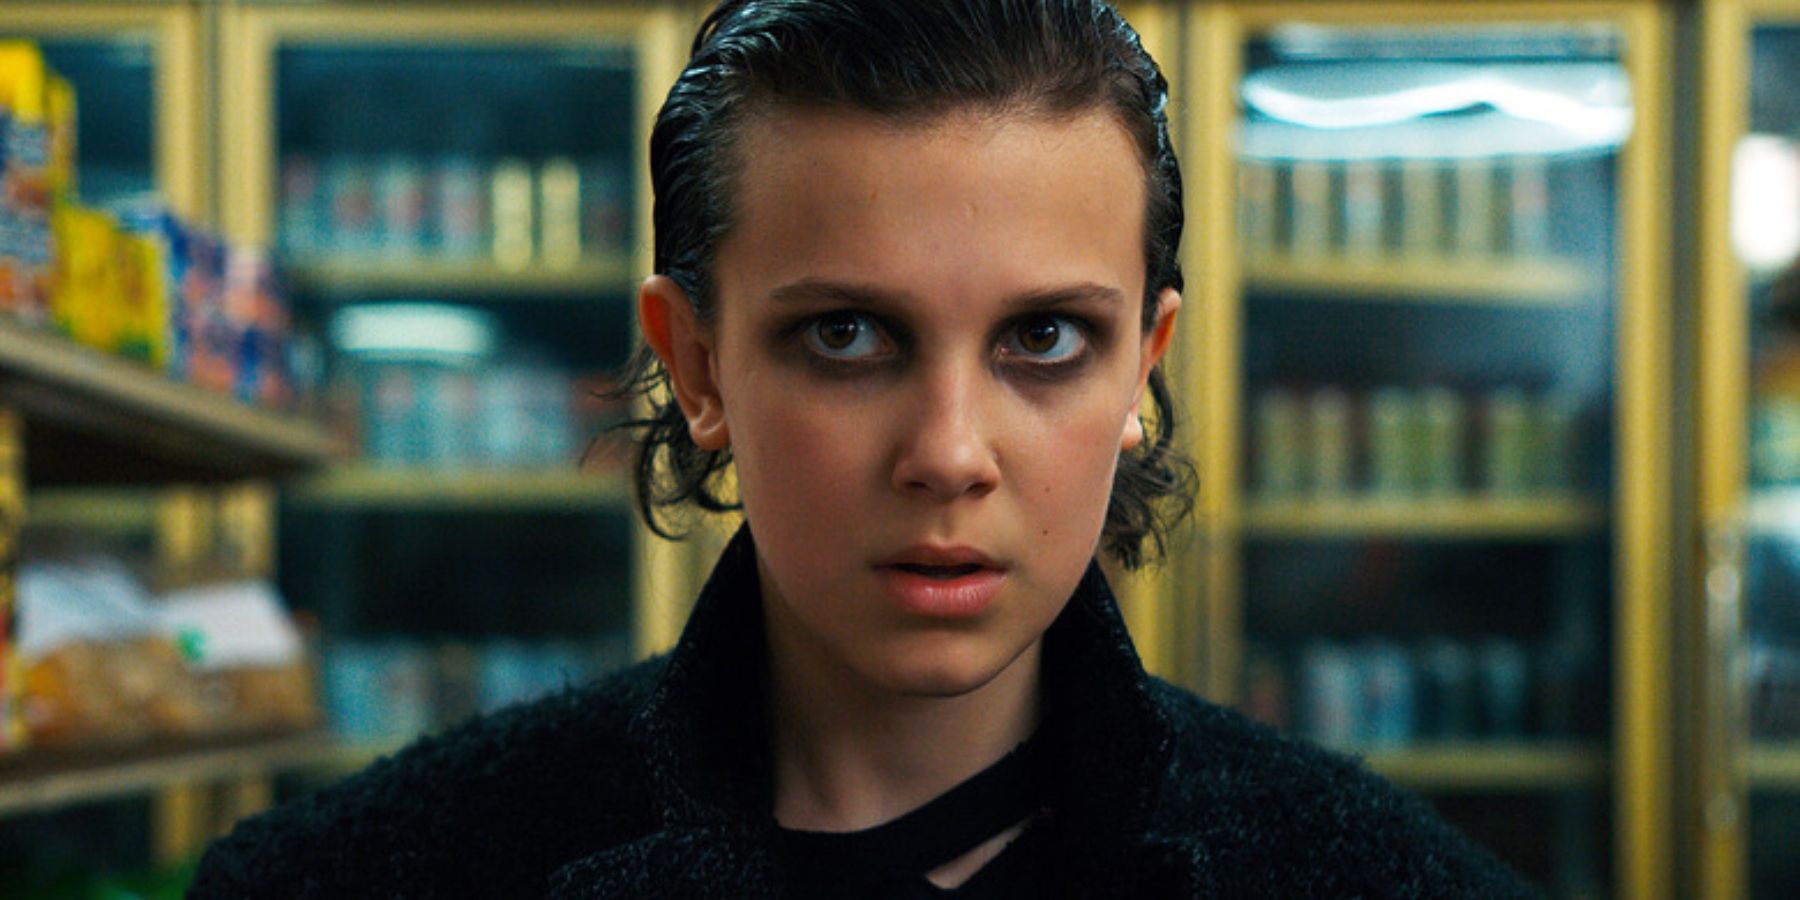 Stranger Things Star Millie Bobby Brown Reveals the 2 Video Games